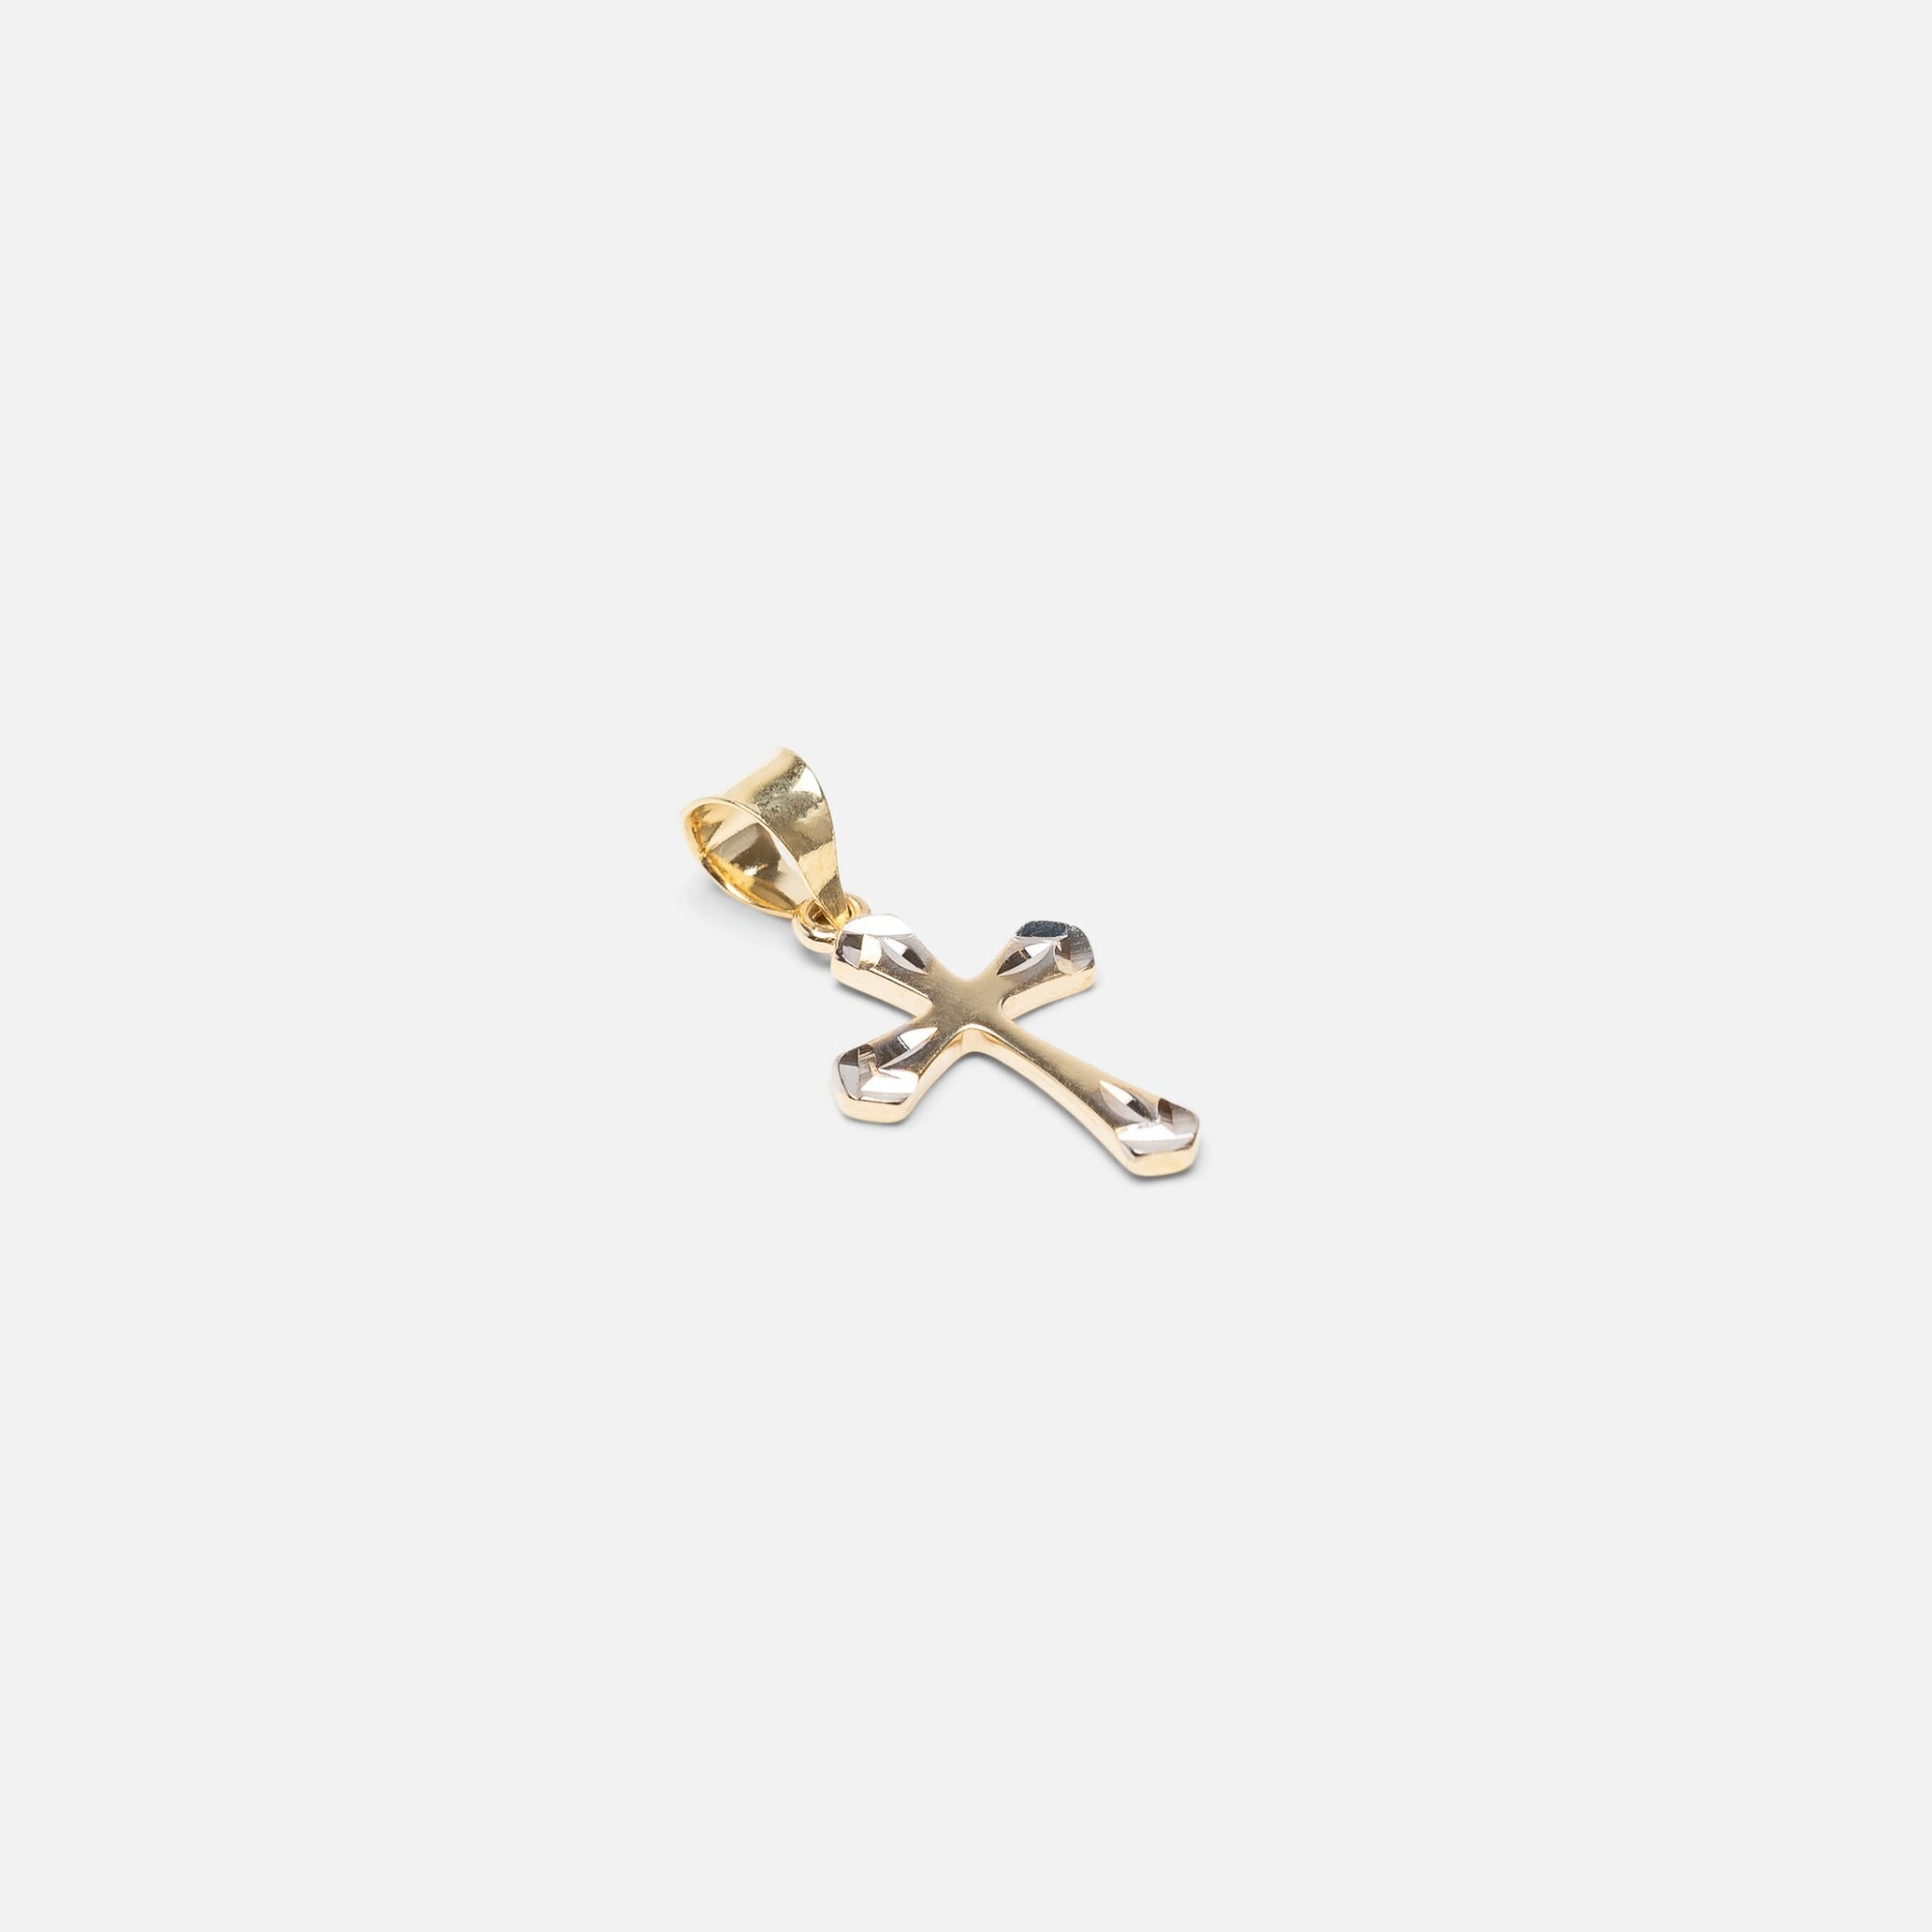 10k yellow gold cross charm with silvered details